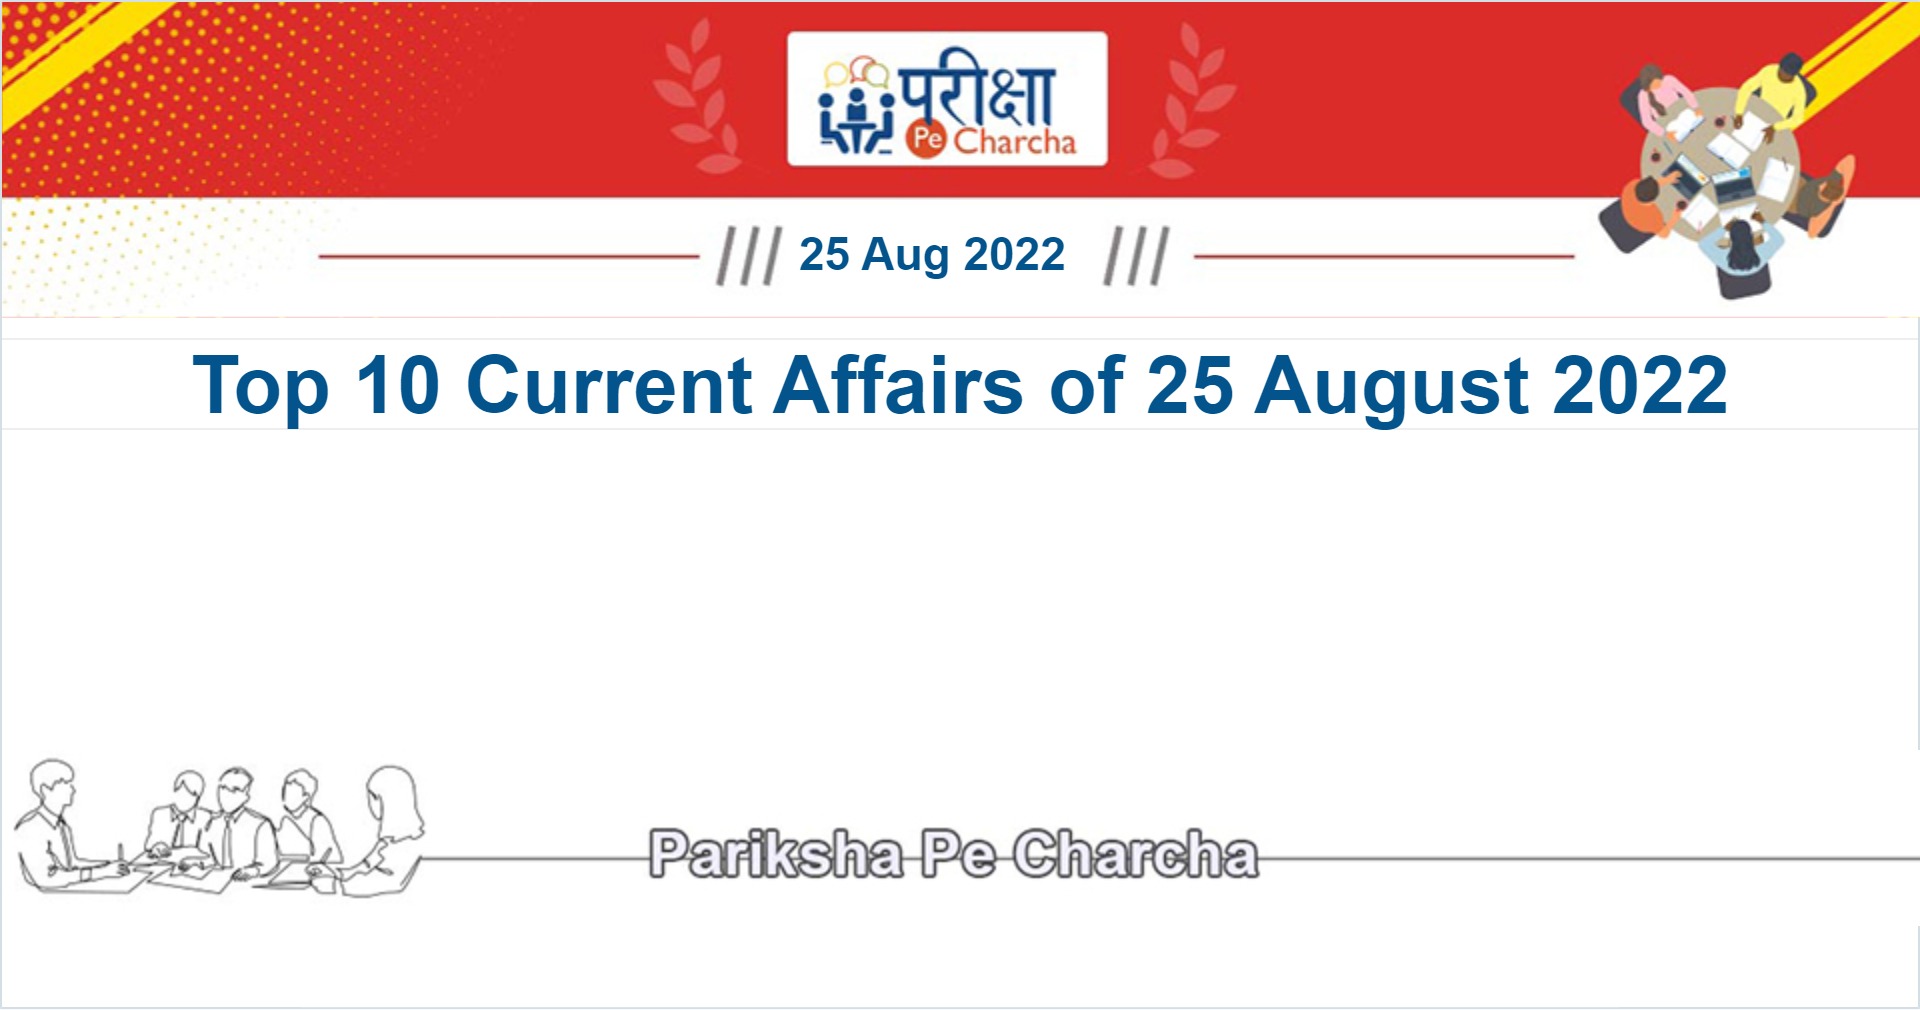 Top 10 Current Affairs Of 25 August 2022 In Hindi And English 3918